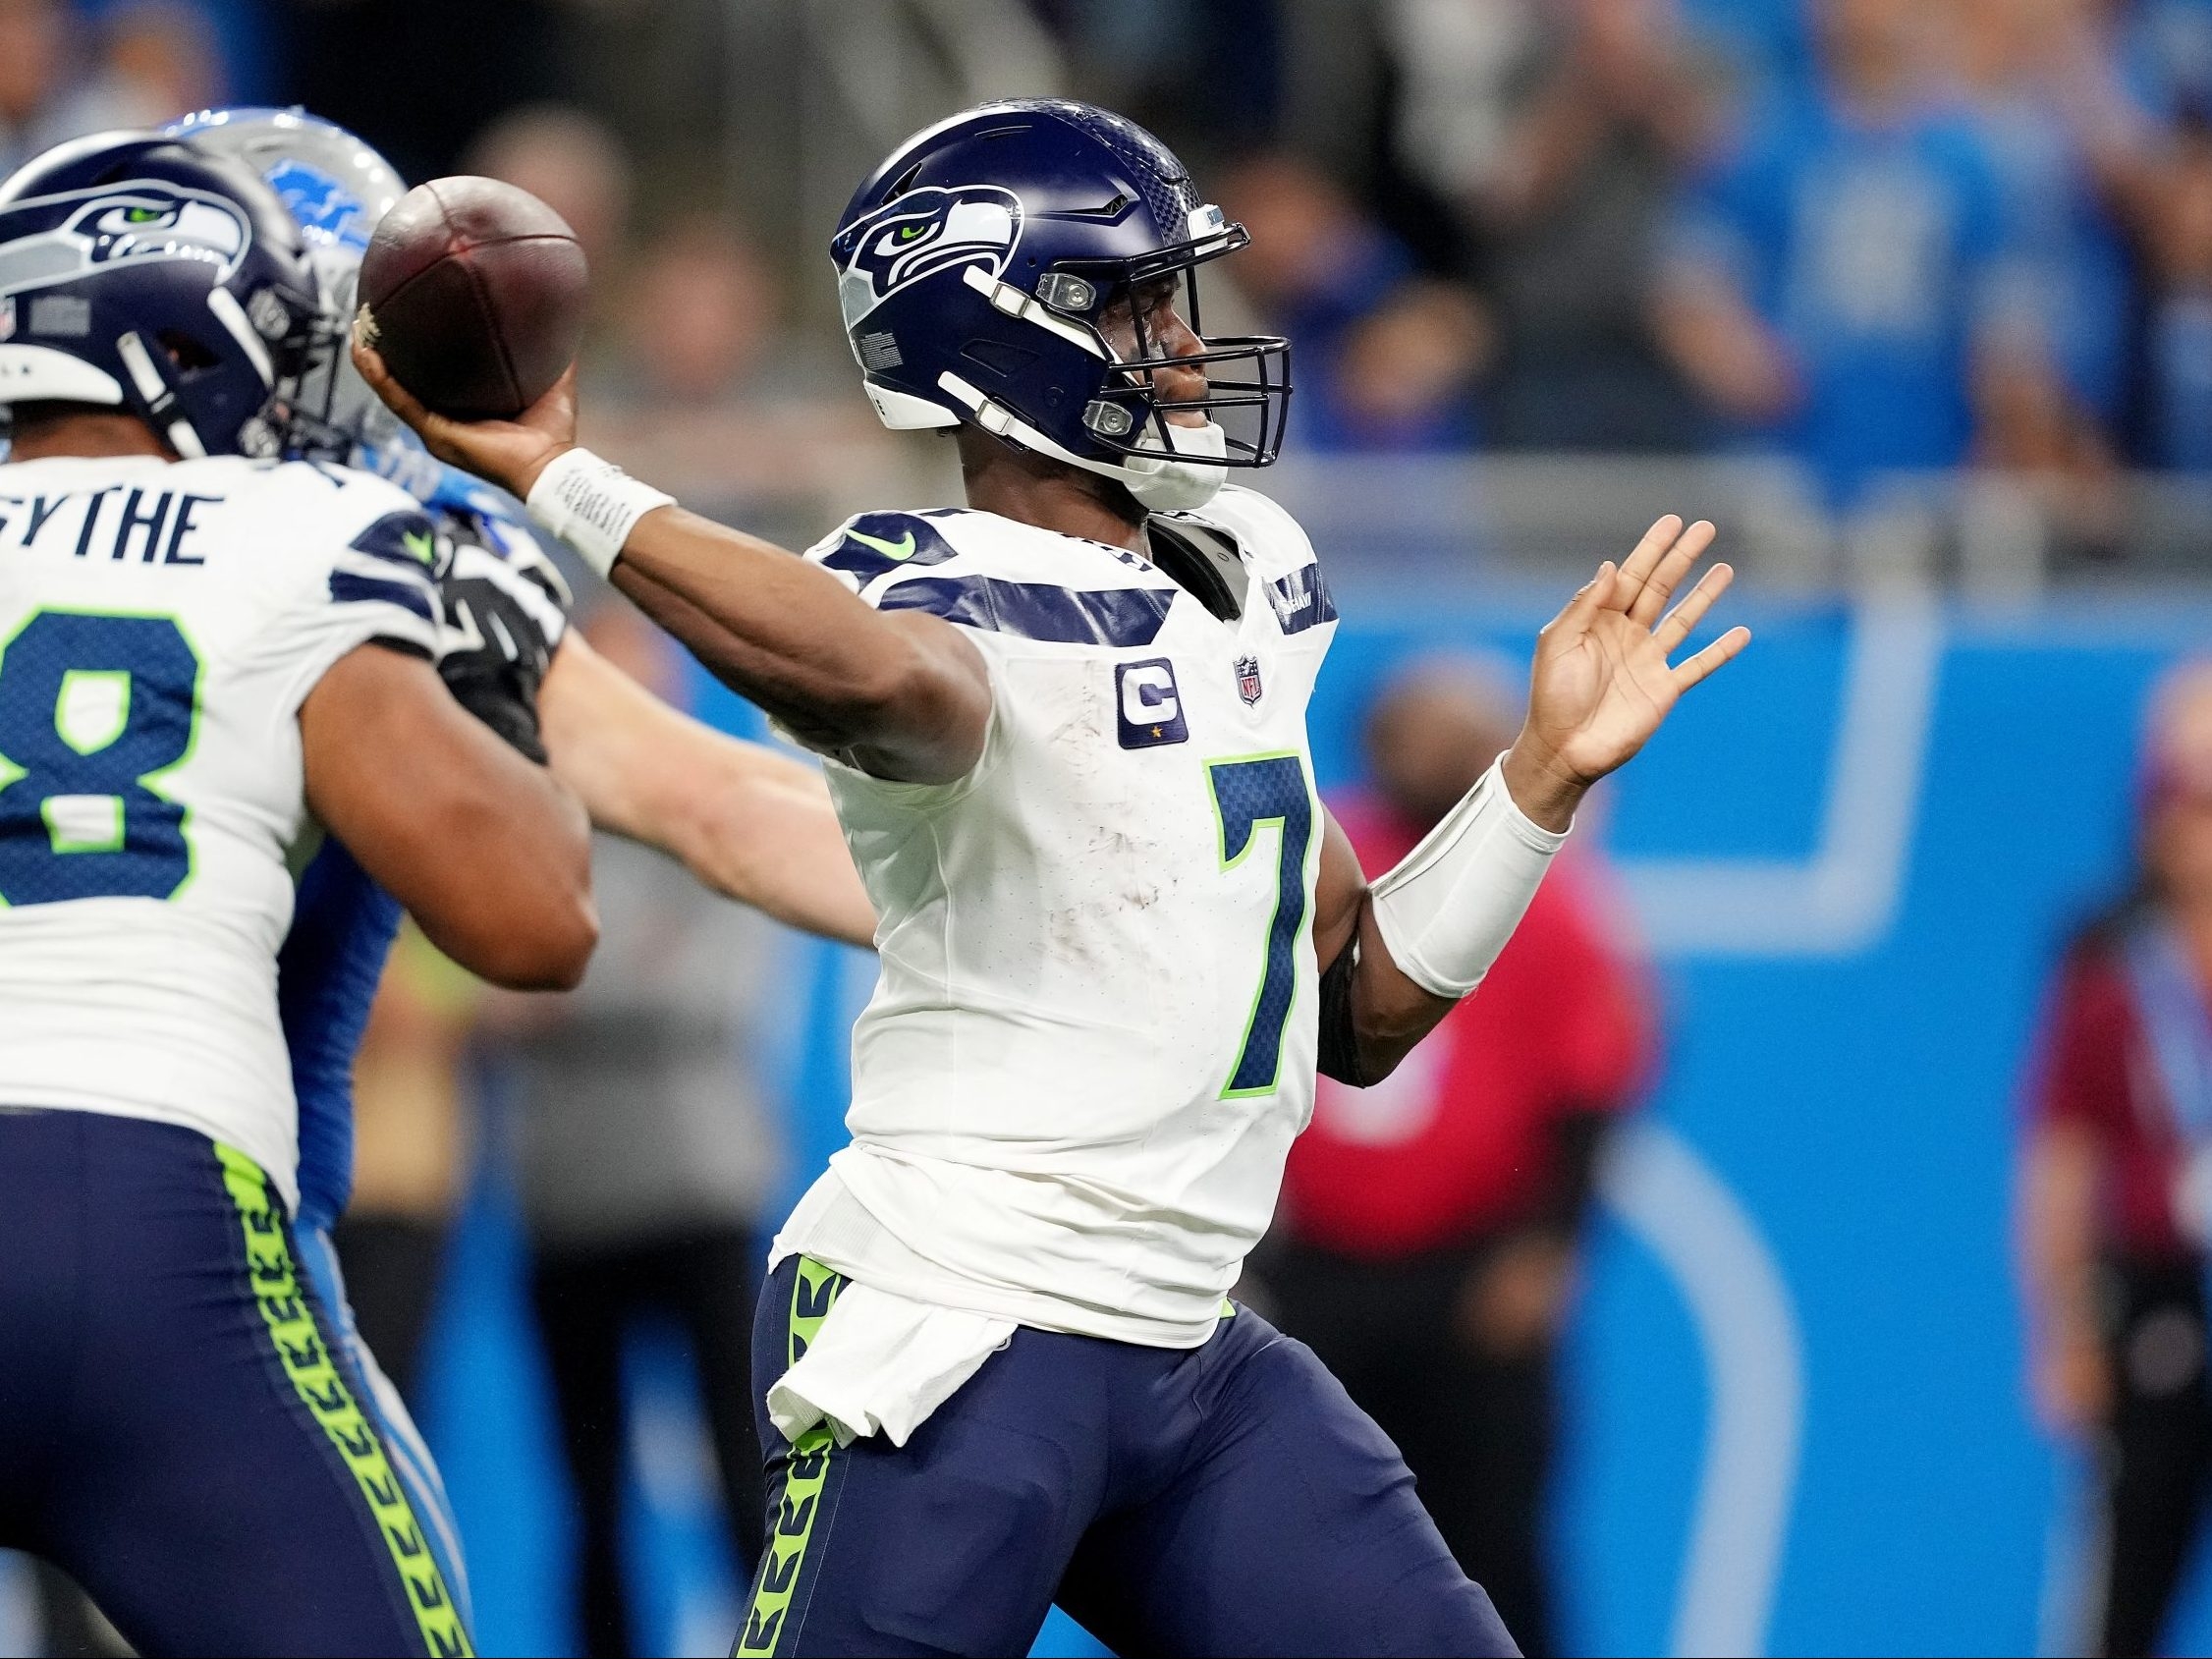 Geno Smith lifts Seahawks to OT win over the Lions